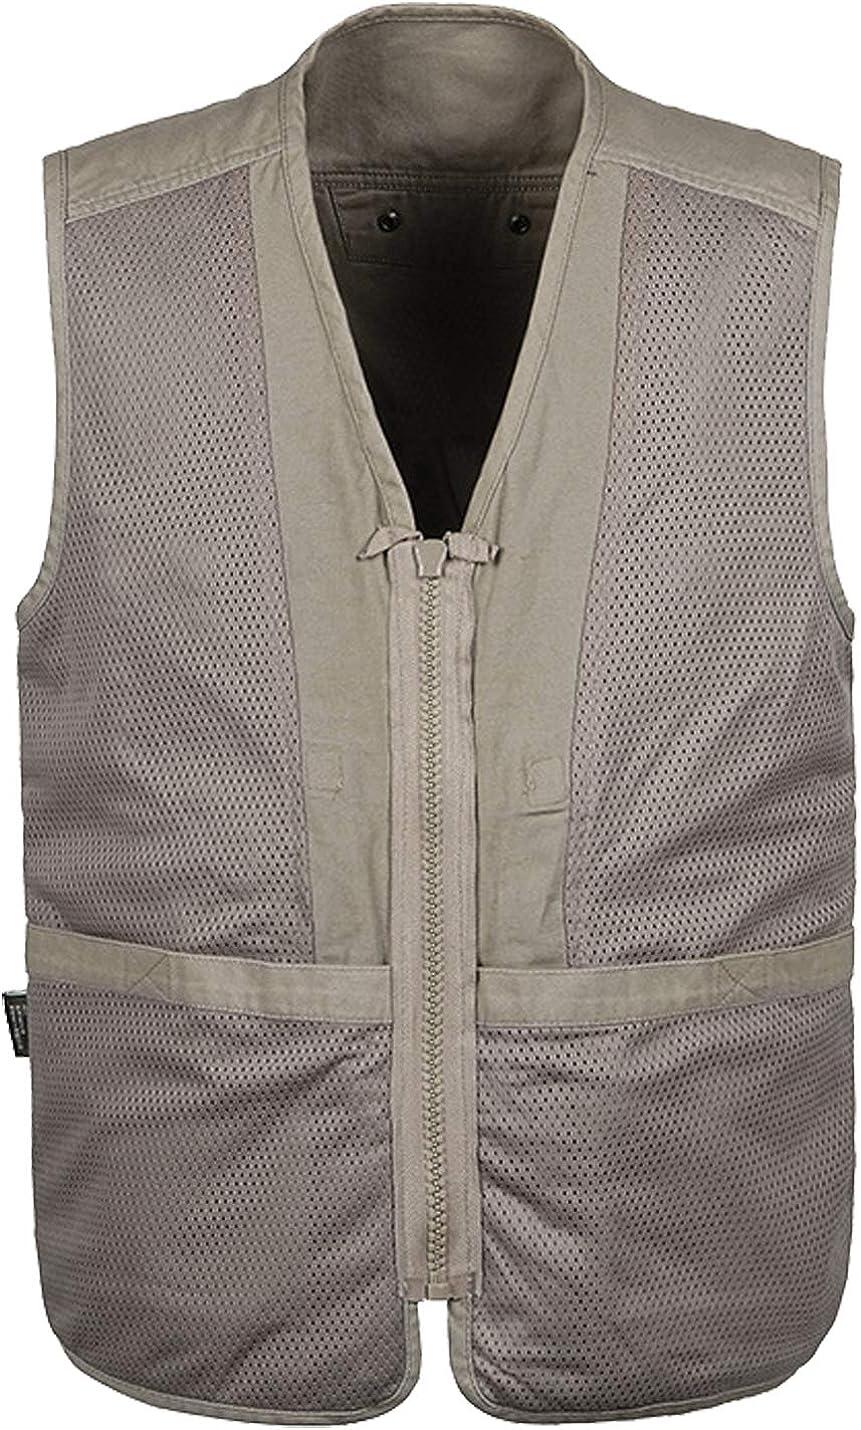 Flygo Mens Casual Outdoor Work Utility Safari Fishing Travel Vest with  Pockets Large Light Green